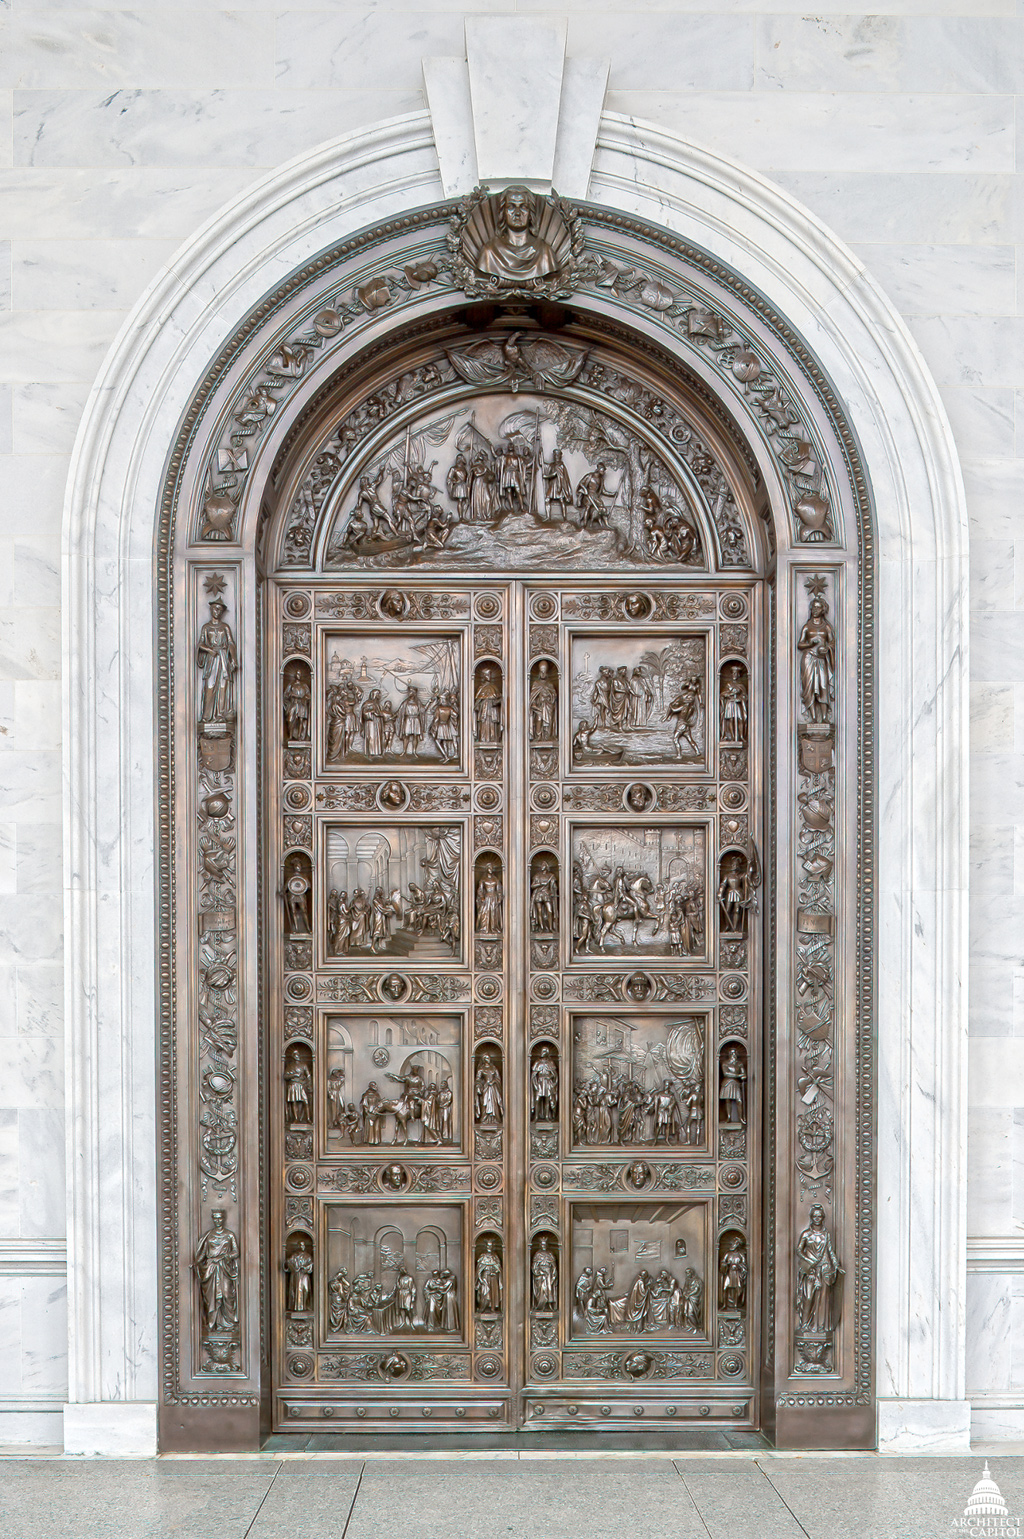 Randolph Rogers' Columbus doors are located on the east entrance to the Rotunda.